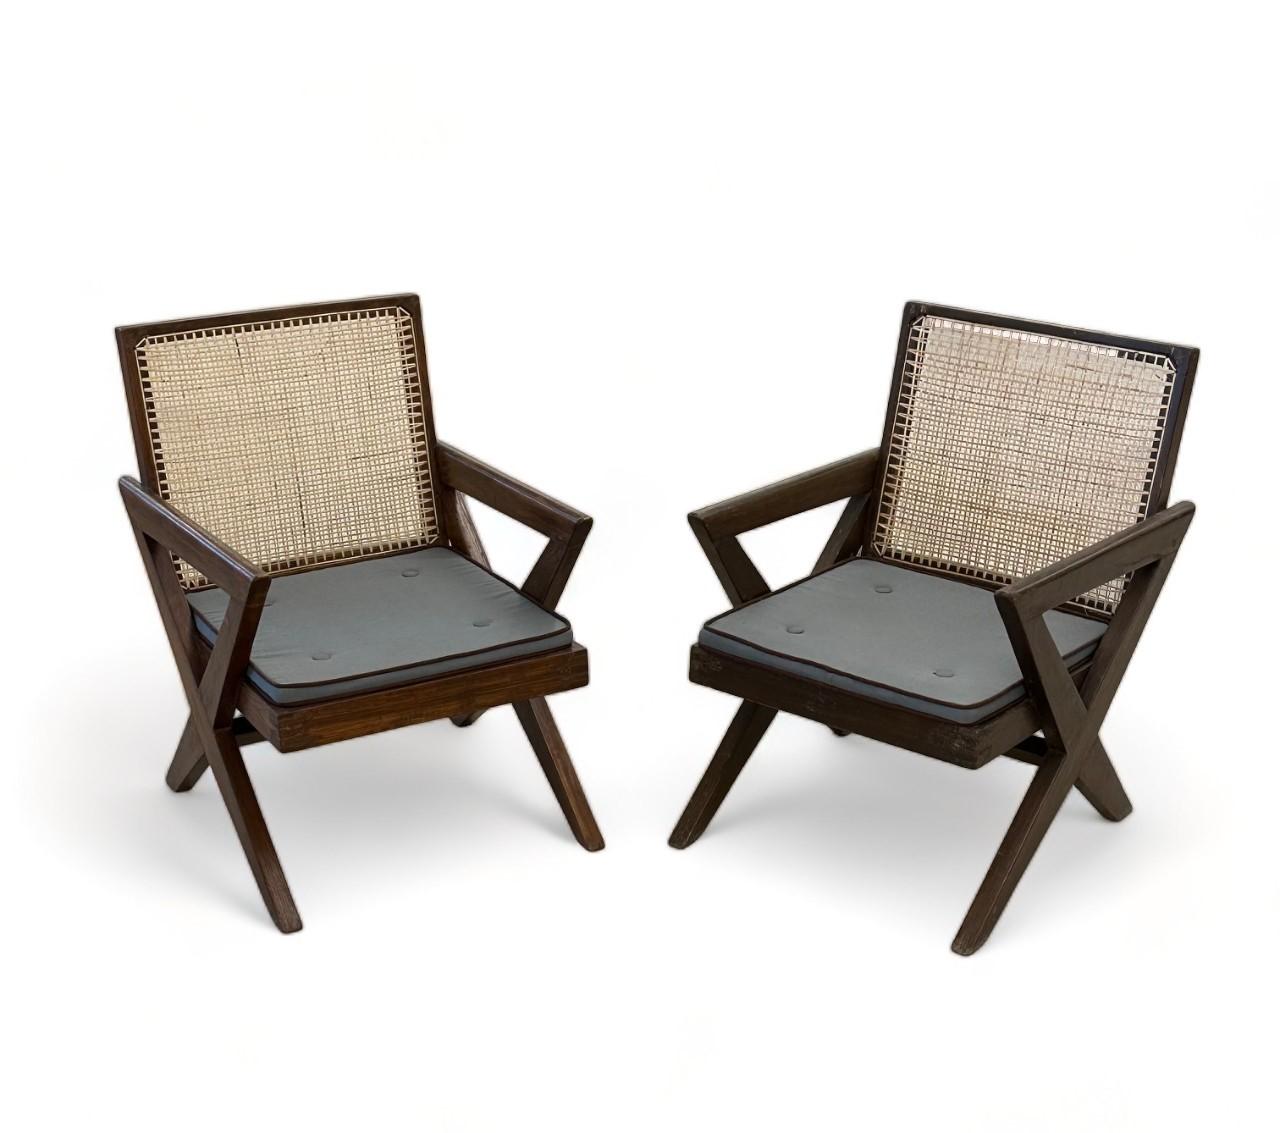 Pierre Jeanneret, French Mid-Century Modern, Lounge Chairs, Chandigarh, 1950s

Pair of rare Pierre Jeanneret 'X',  easy armchairs. These chairs have been lightly washed and polished. The cane has been re-done by hand. These are directly from